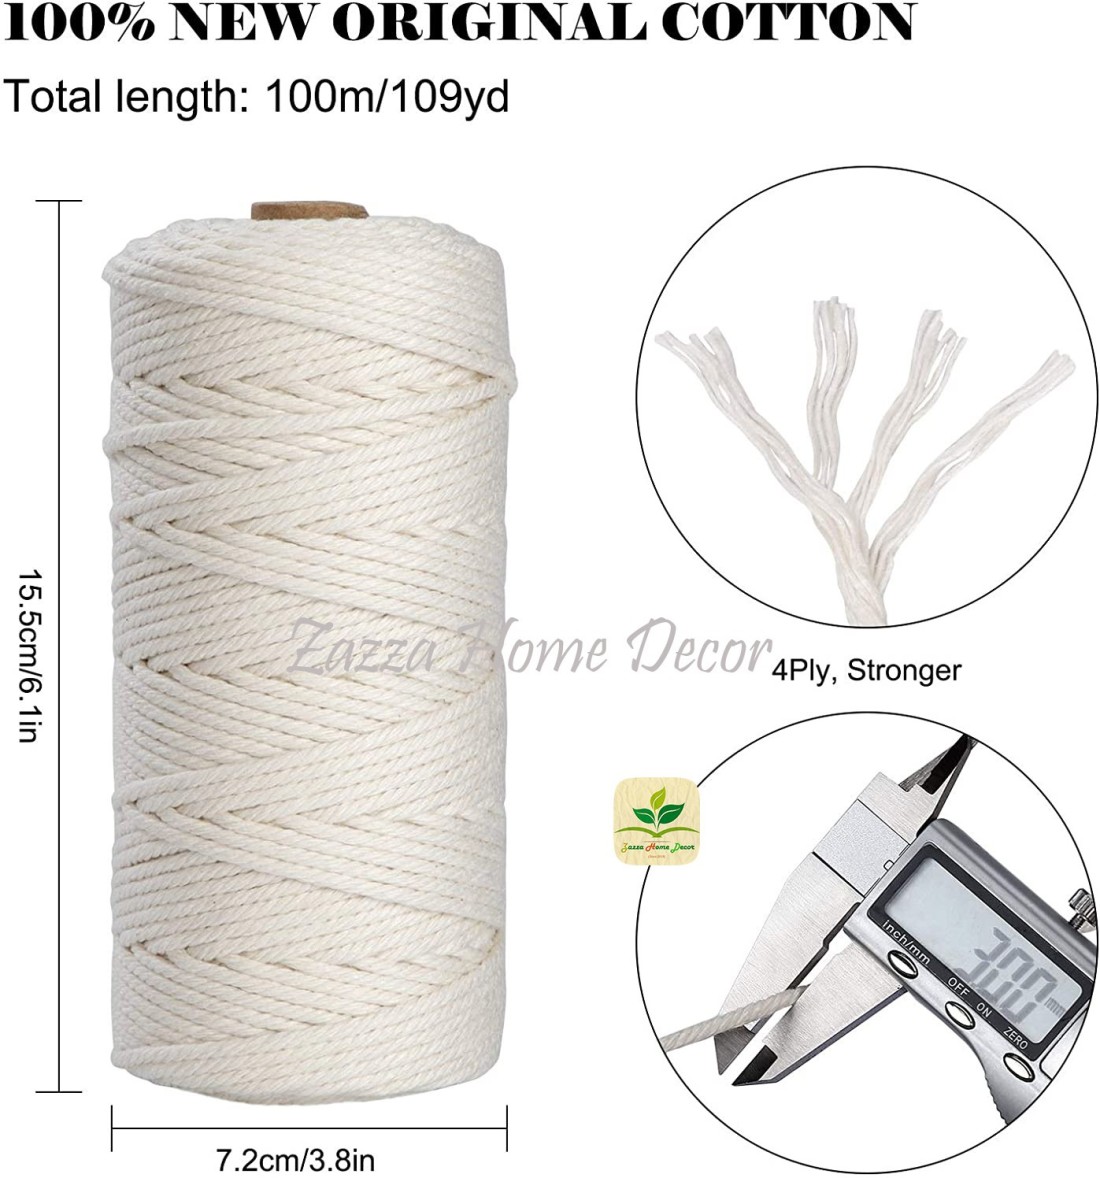 Macrame Cord 4mm 109yd (100m) 4ply Colored, 100% Natural Cotton Rope Braid  Knit